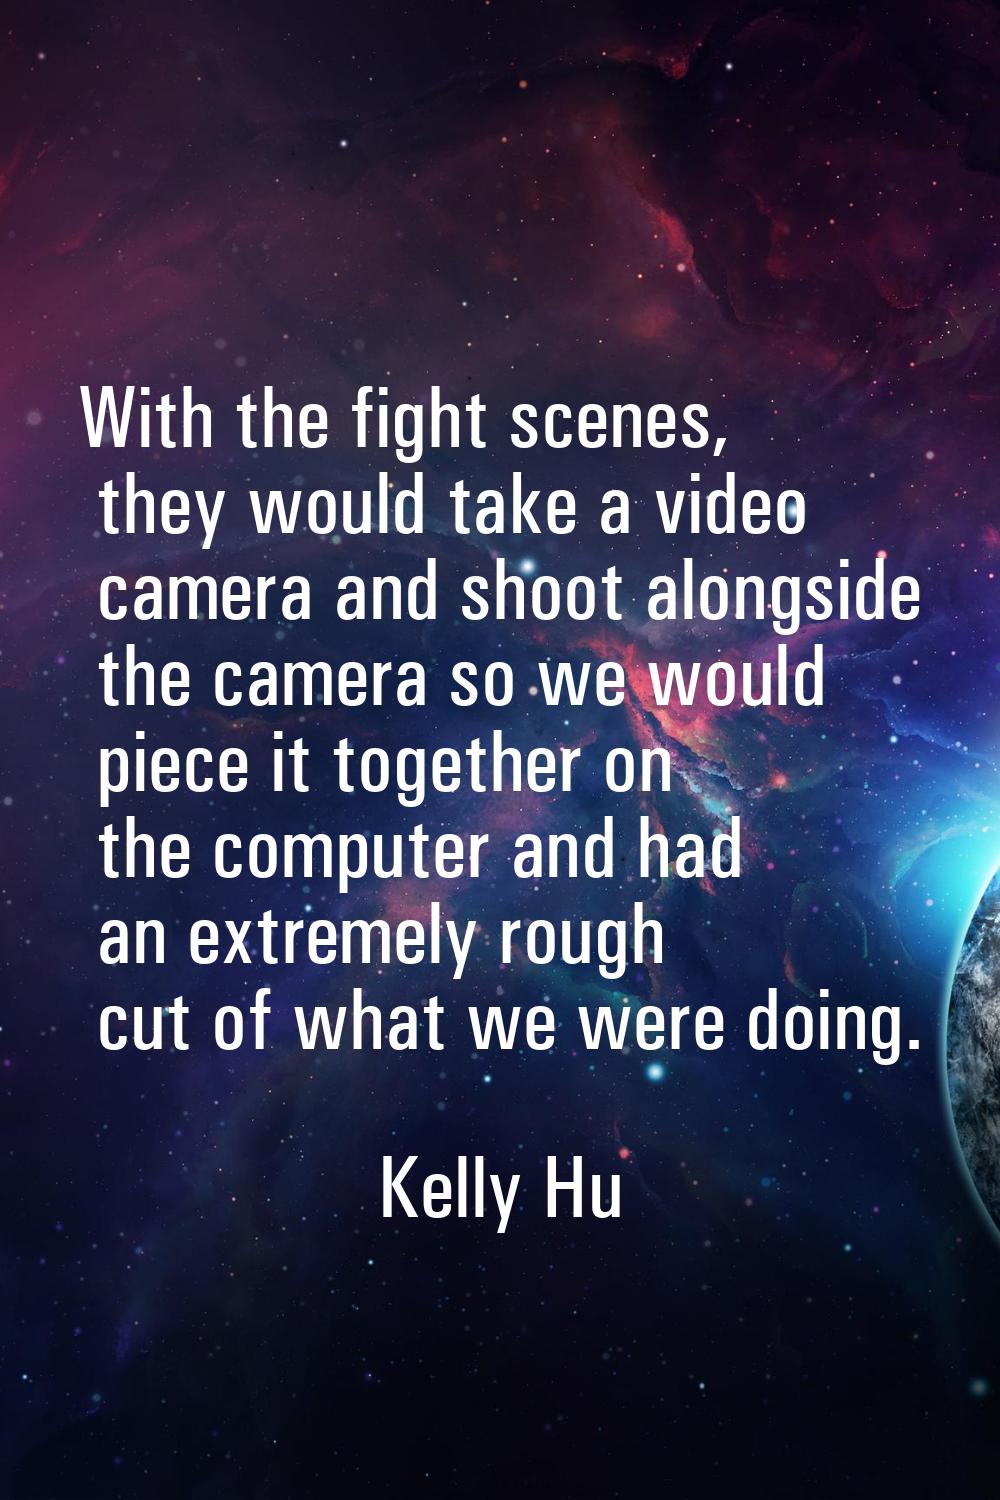 With the fight scenes, they would take a video camera and shoot alongside the camera so we would pi